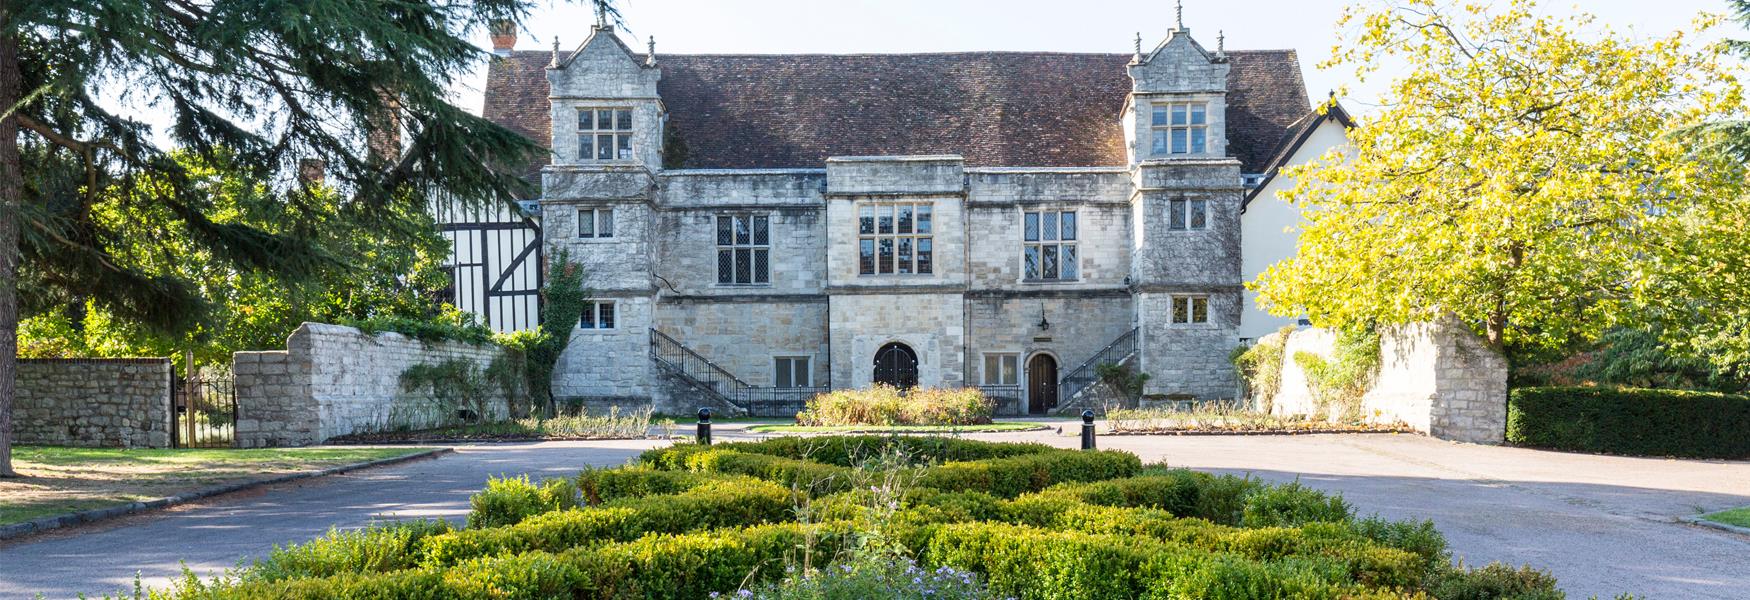 Maidstone has an amazing history and you can discover more about it on our walking tour, which takes in the Archbishop's Palace along the way.  Be sure to spend some time by the river here, as it is beautiful.